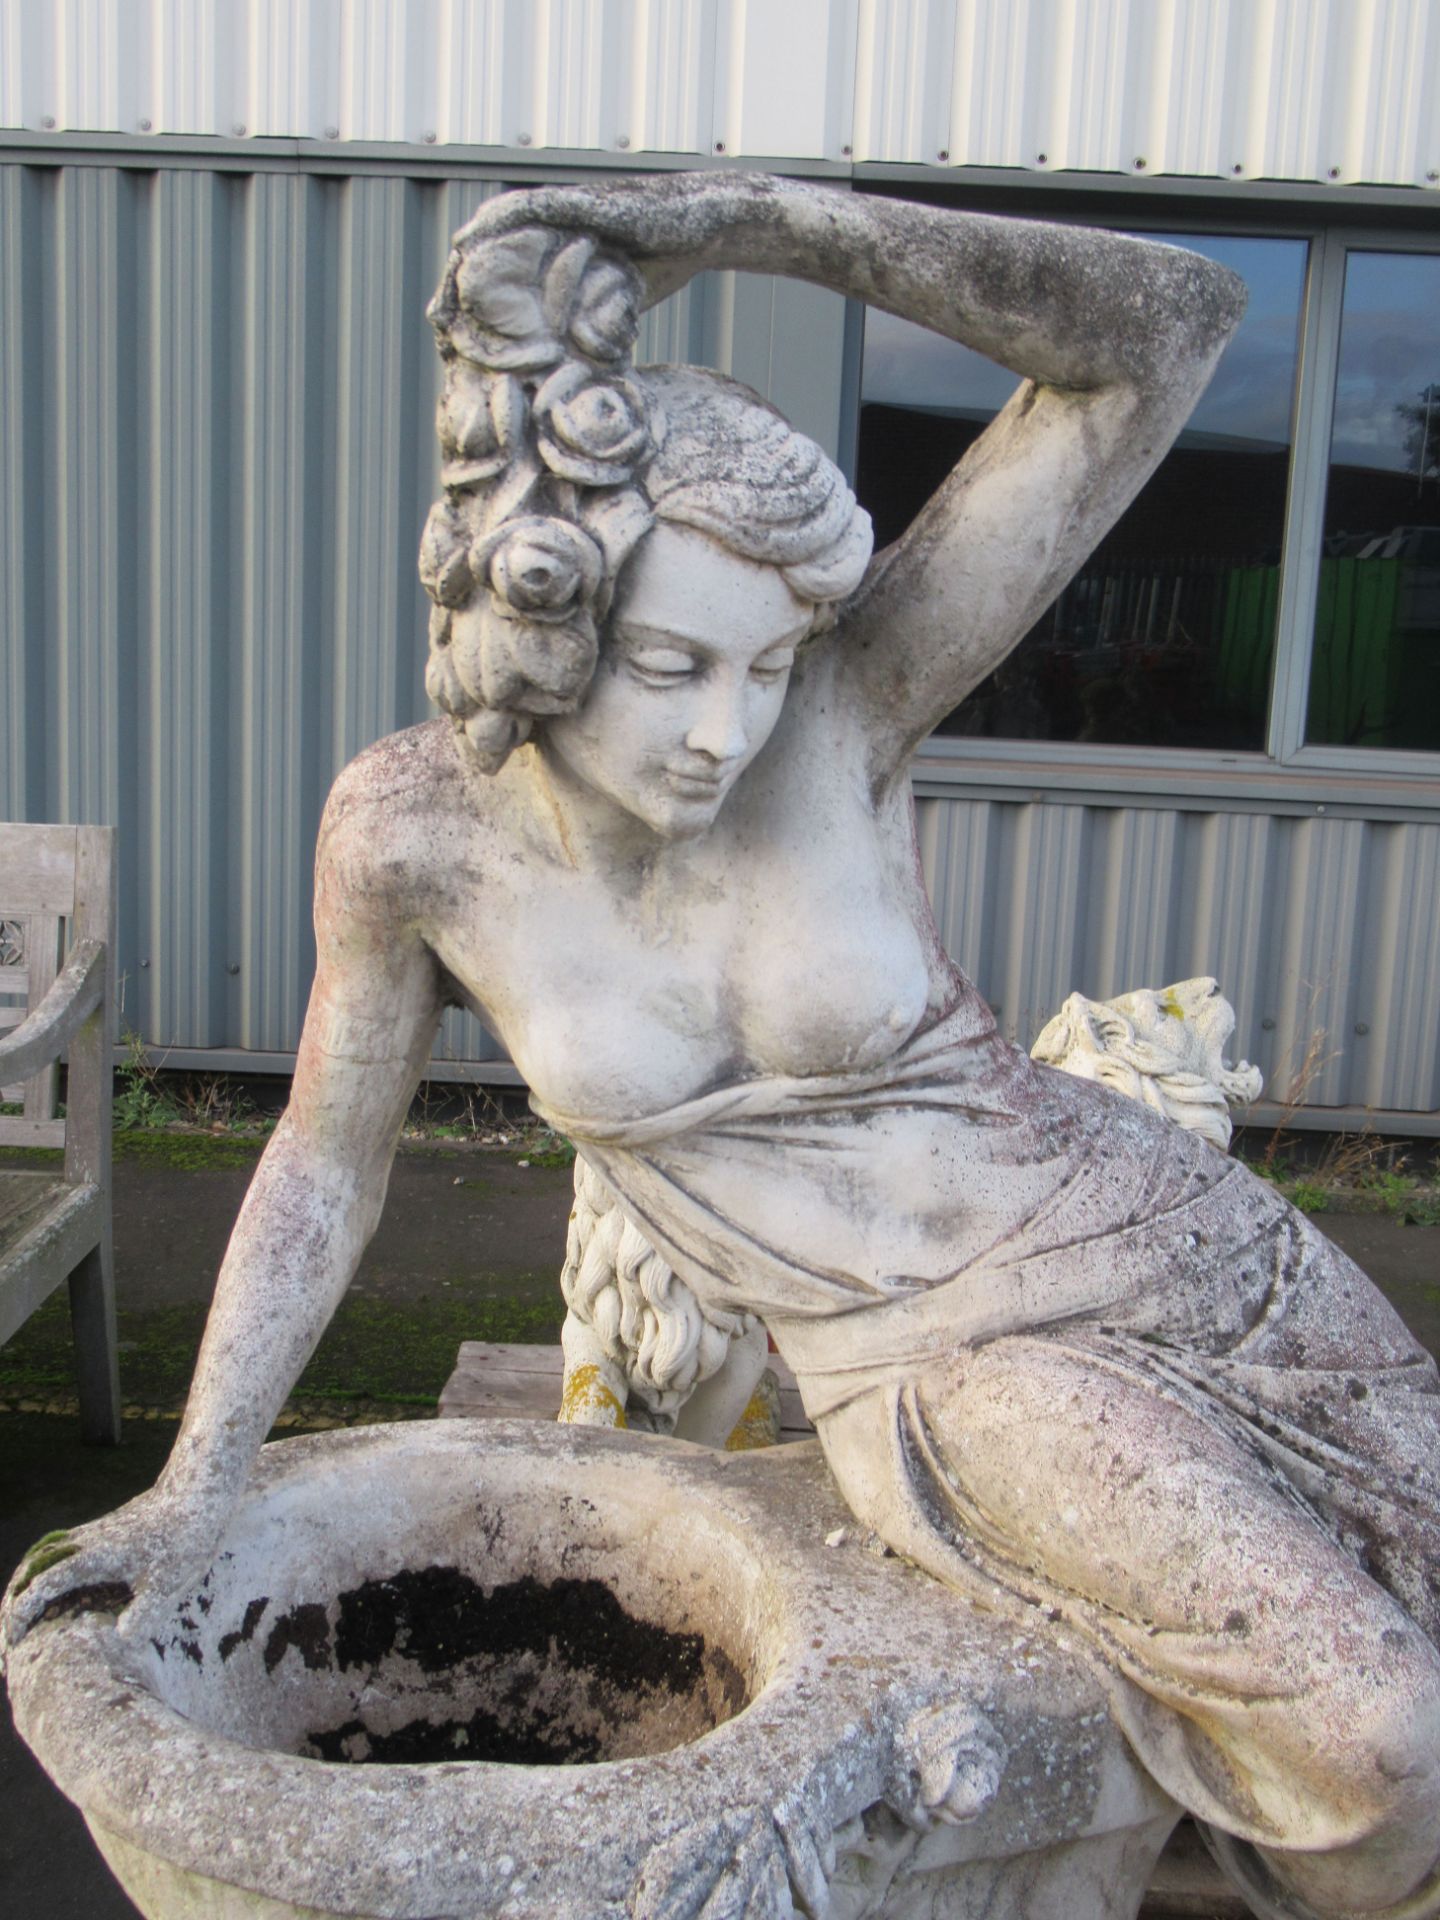 A Large Water Feature/Birdbath Statue of a Semi Naked Lady - Image 3 of 3